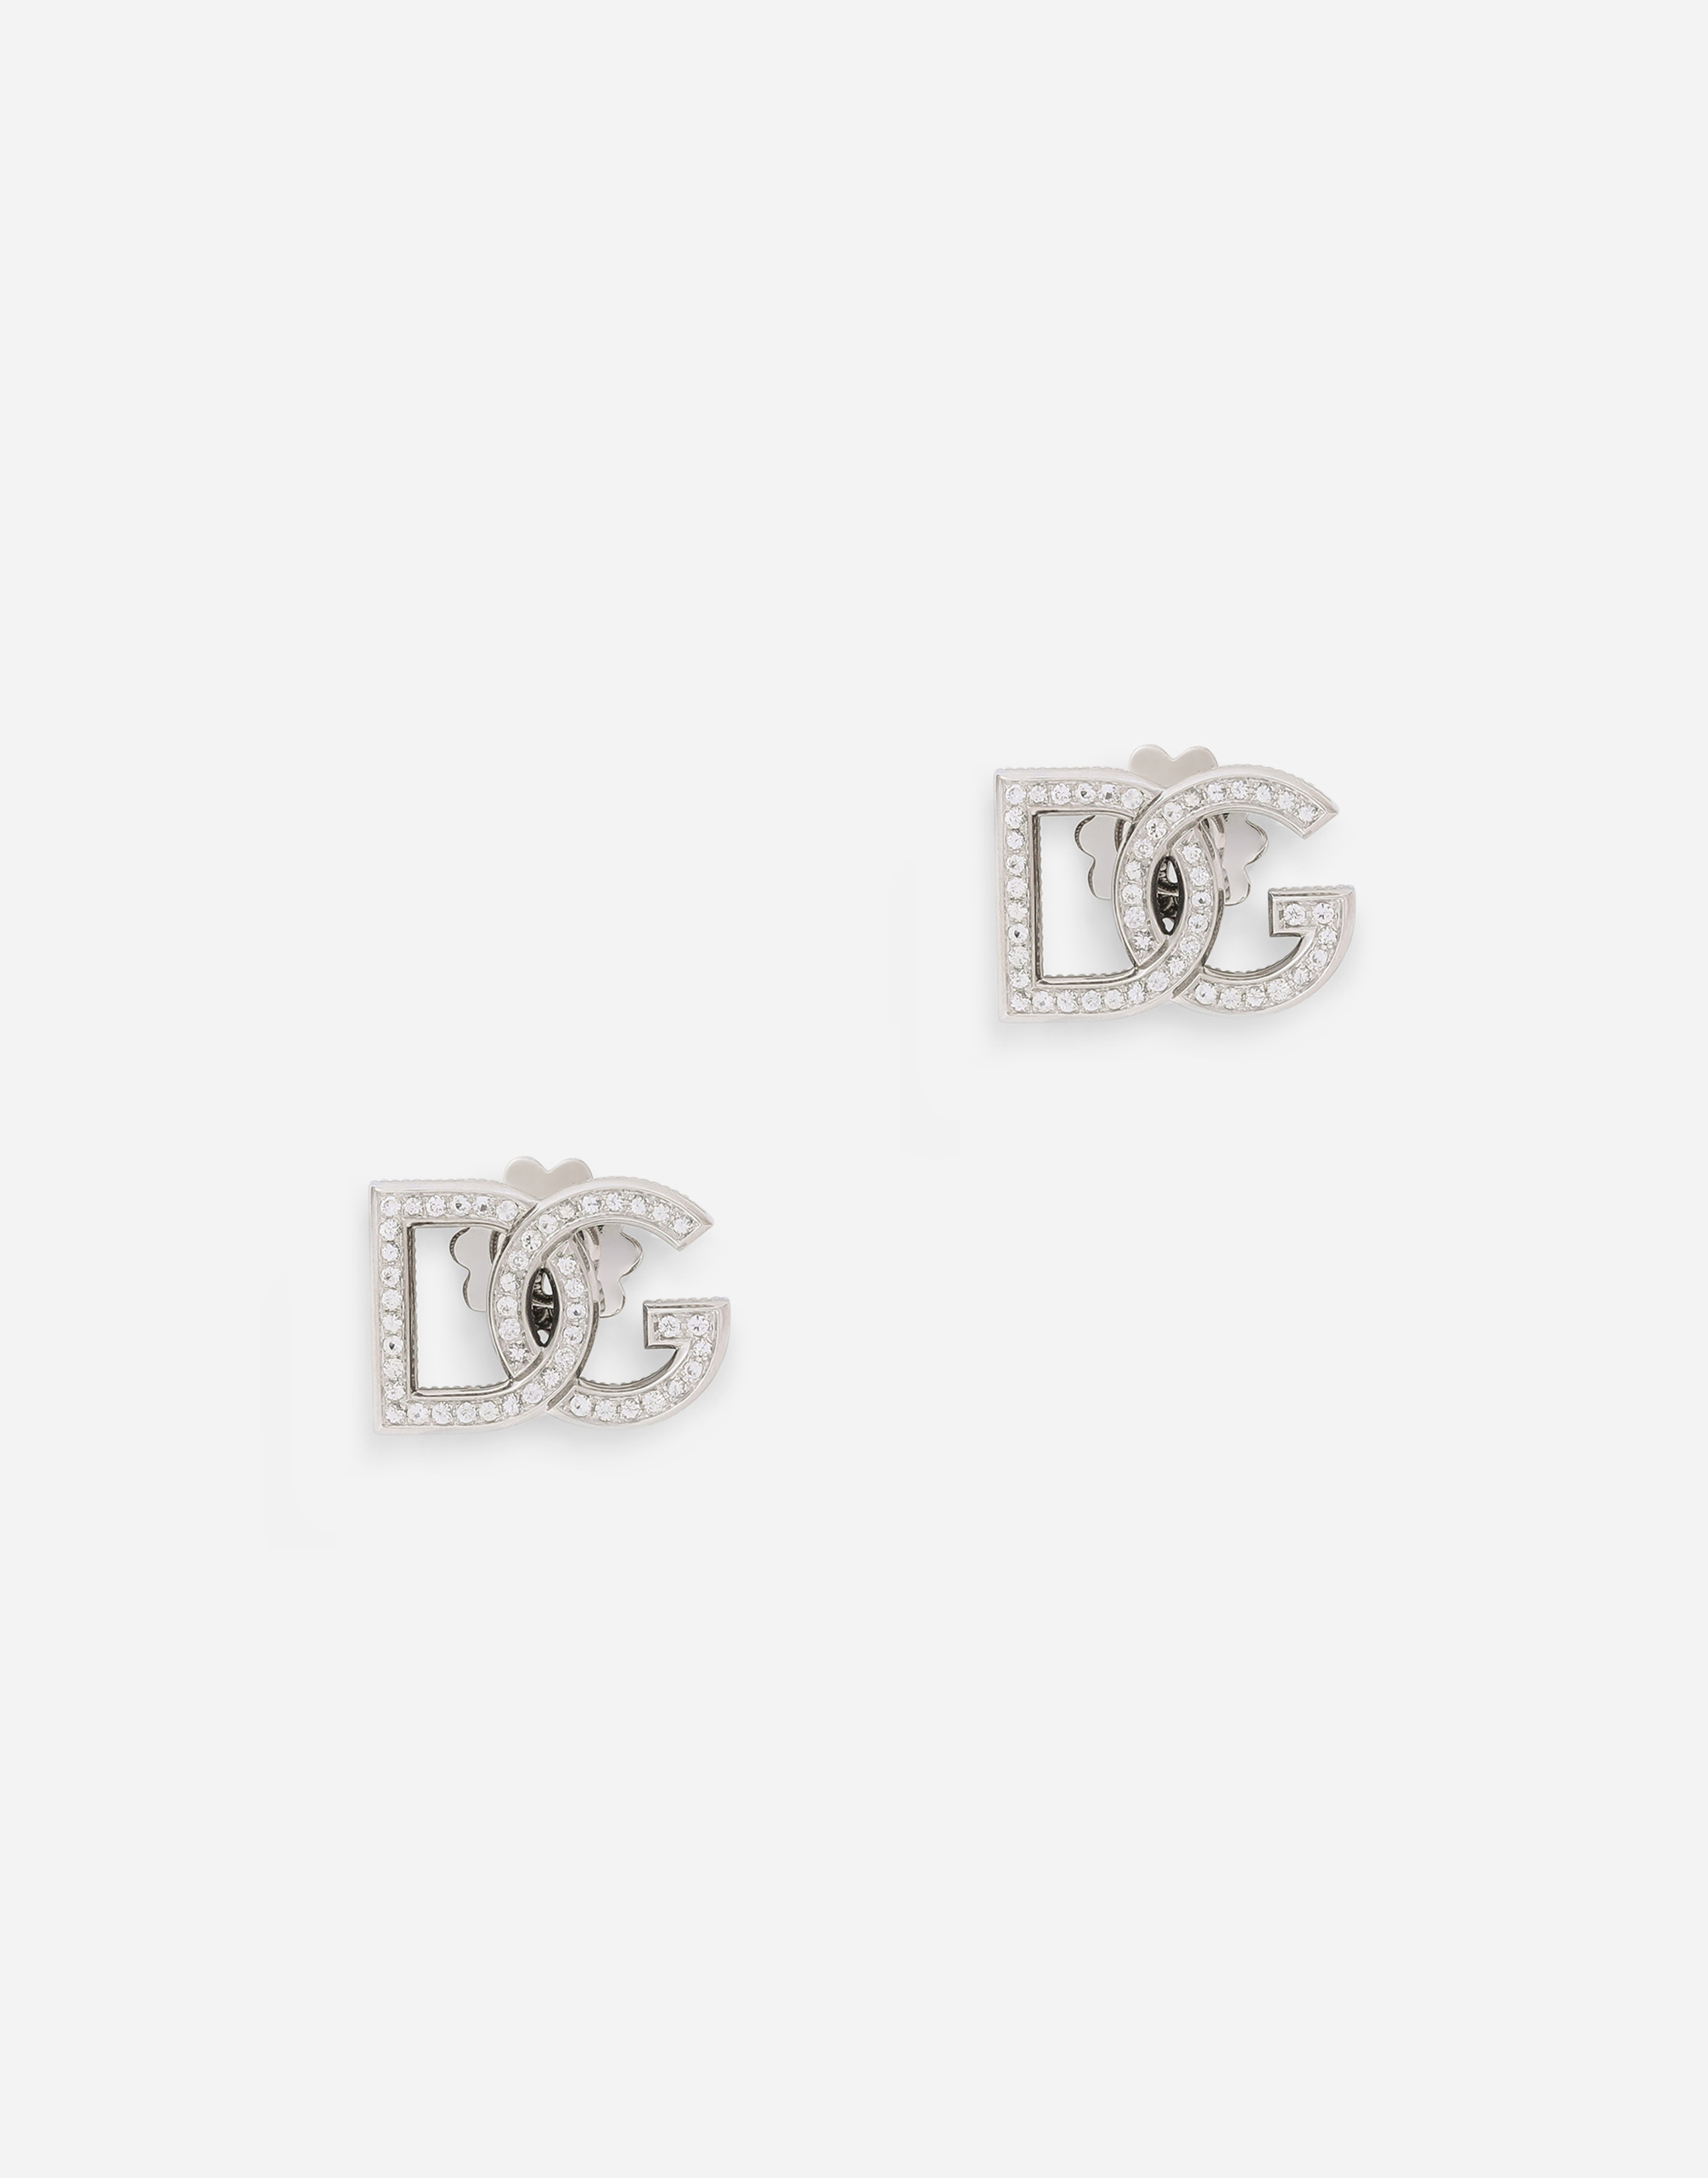 Logo earrings in white 18kt gold with colourless sapphires in White gold